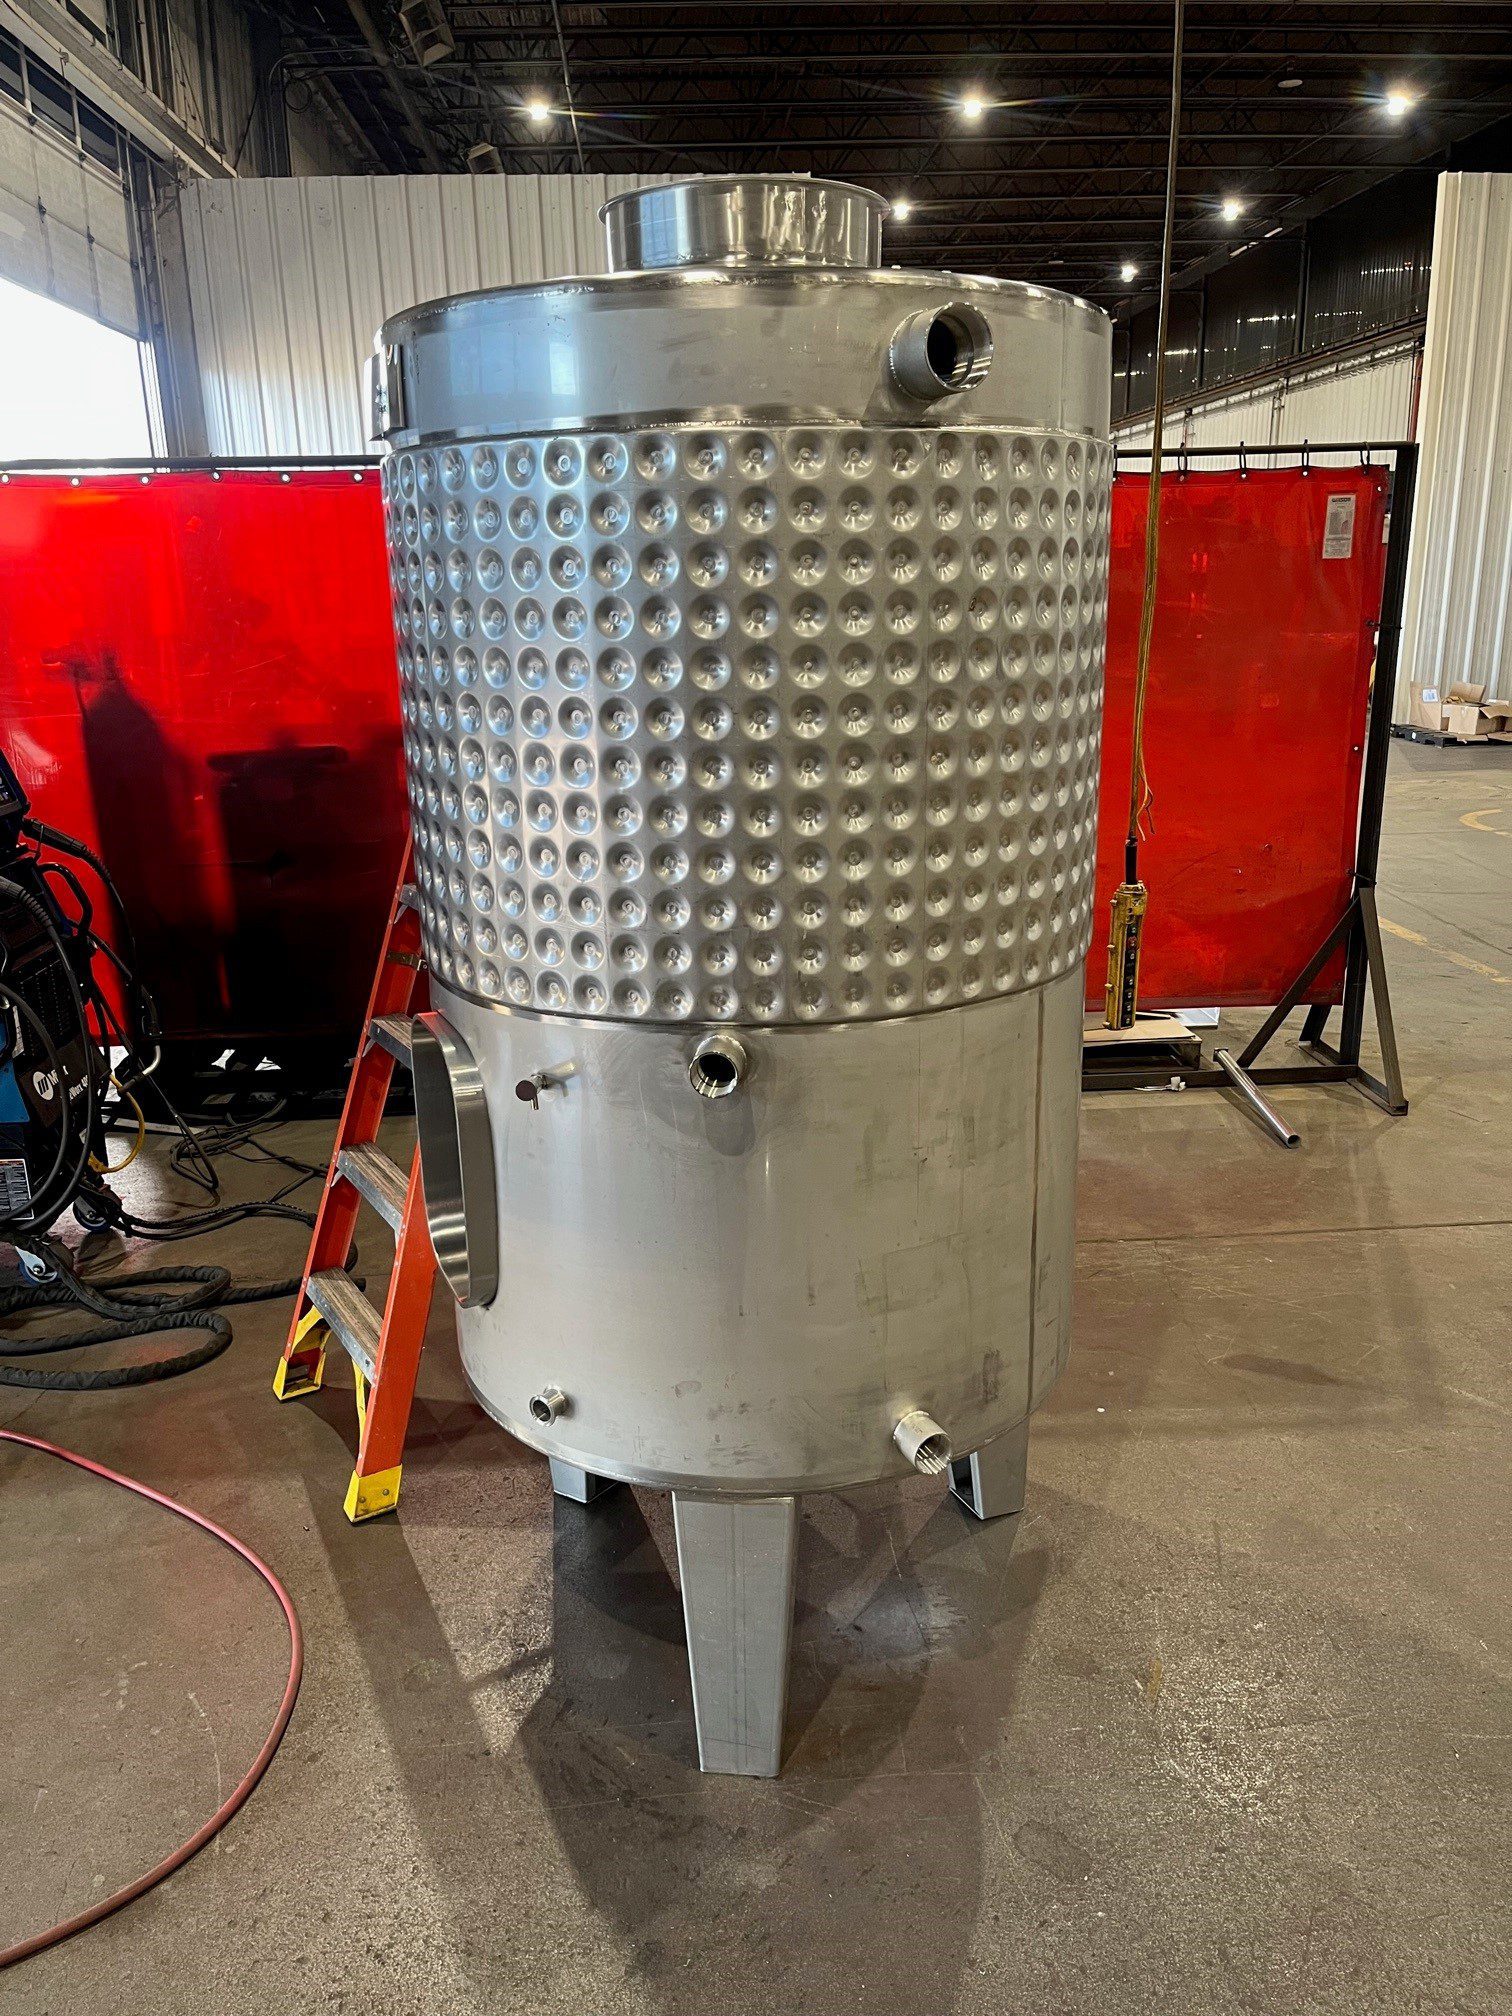 stainless steel tank before shipping.